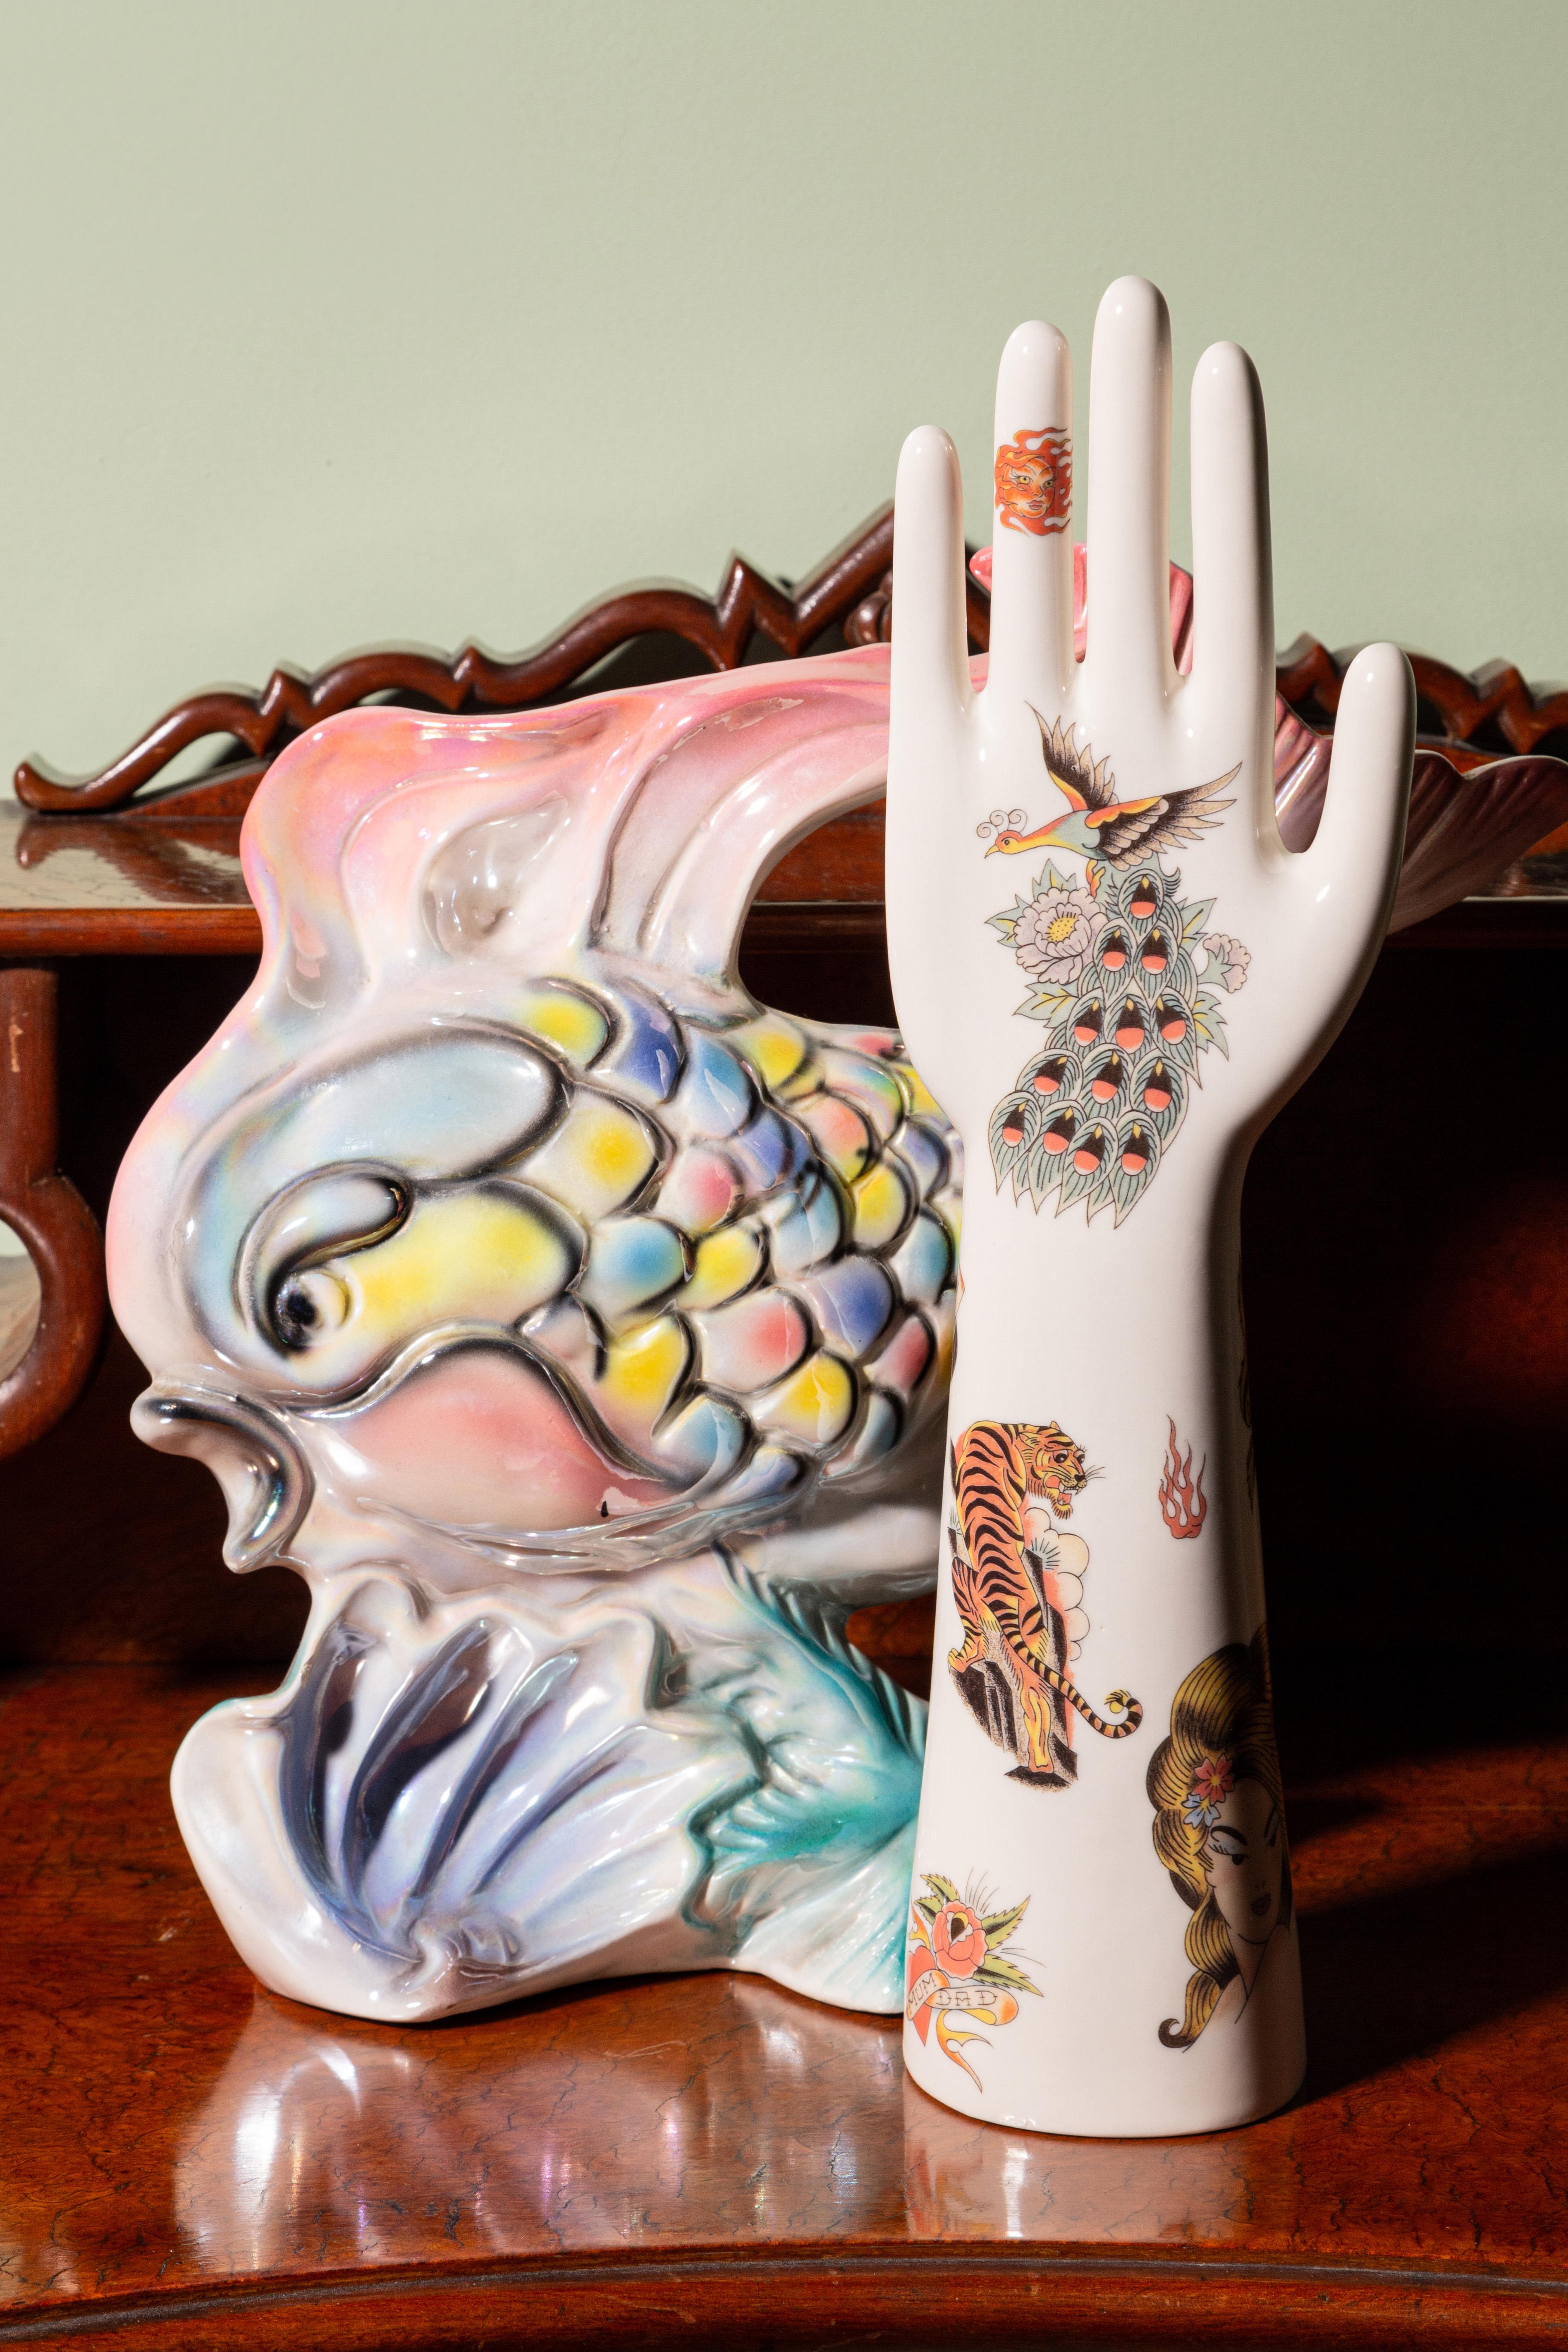 Anatomica, Porcelain Hand with Old School Tattoo Decoration by Vito Nesta For Sale 2